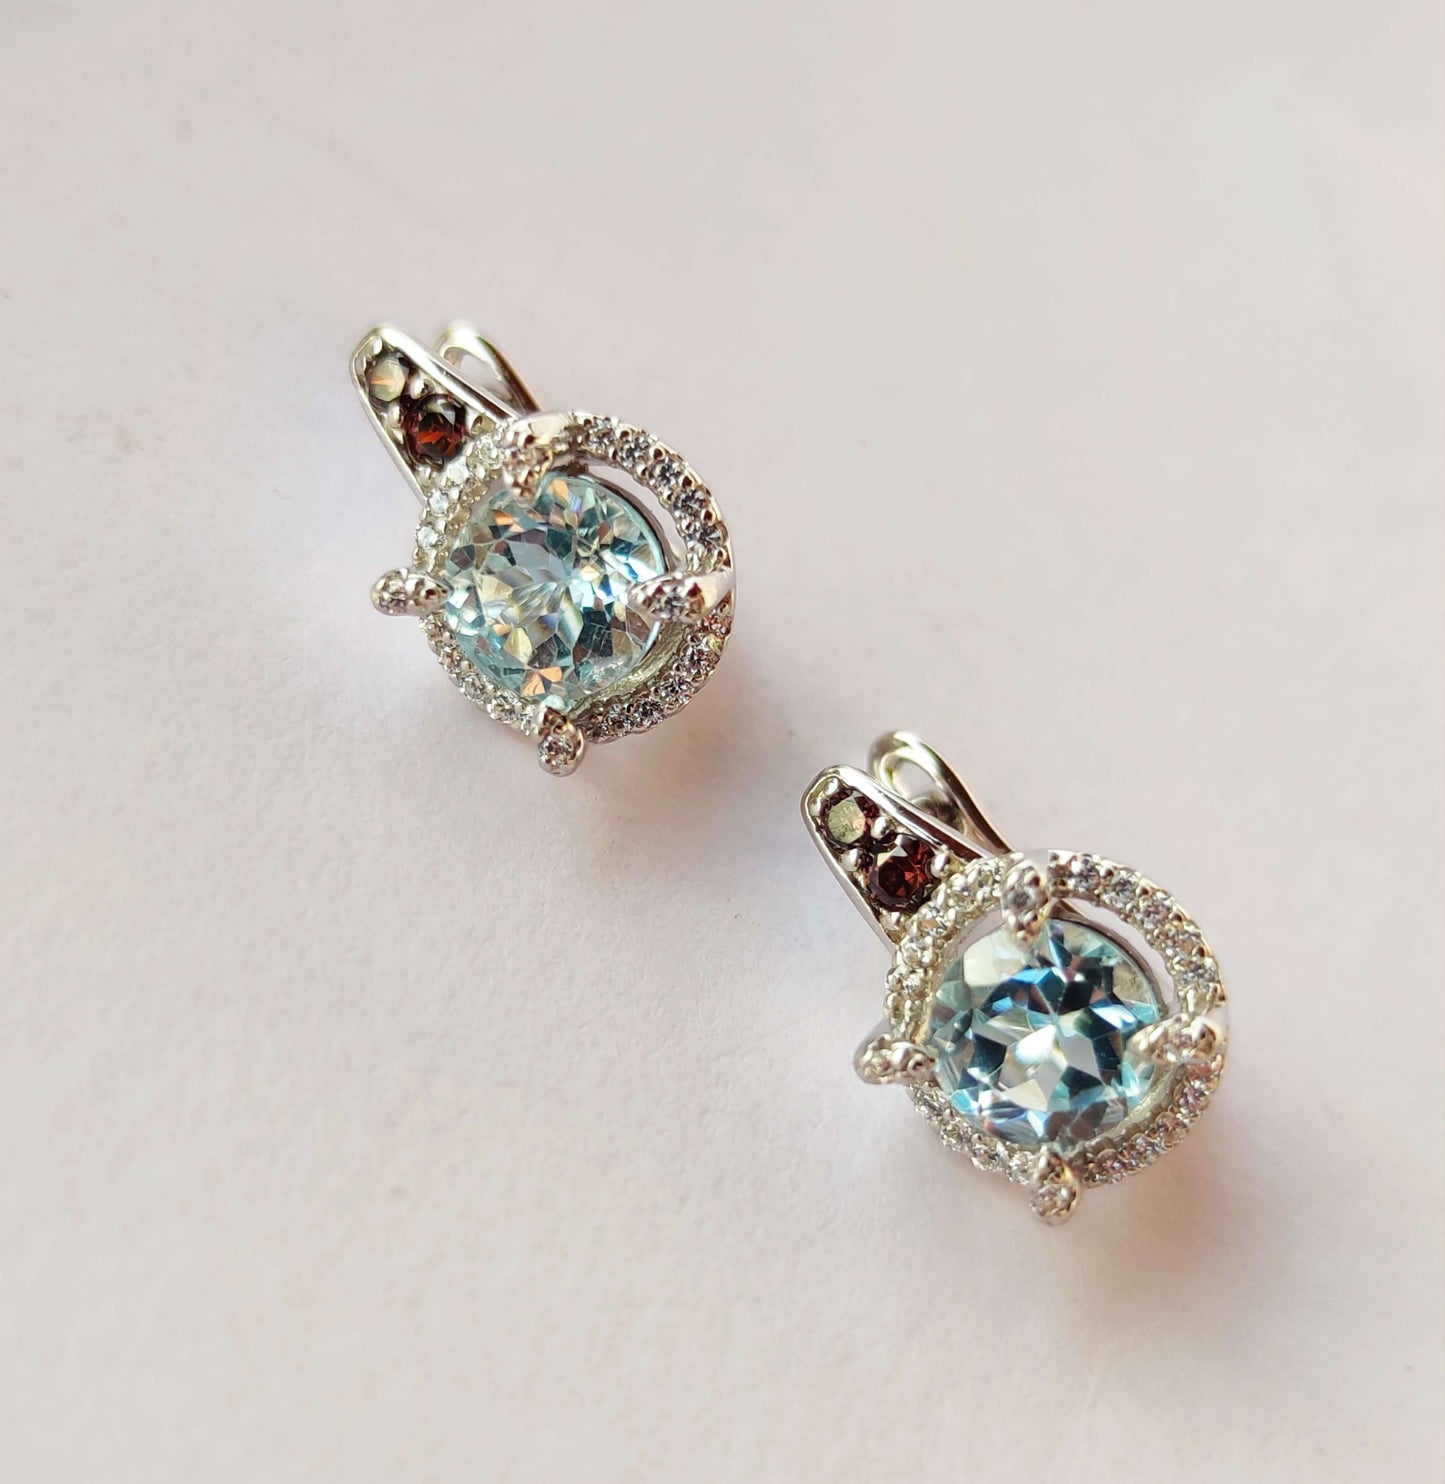 Silver Earrings with Blue Topazes and Zircons